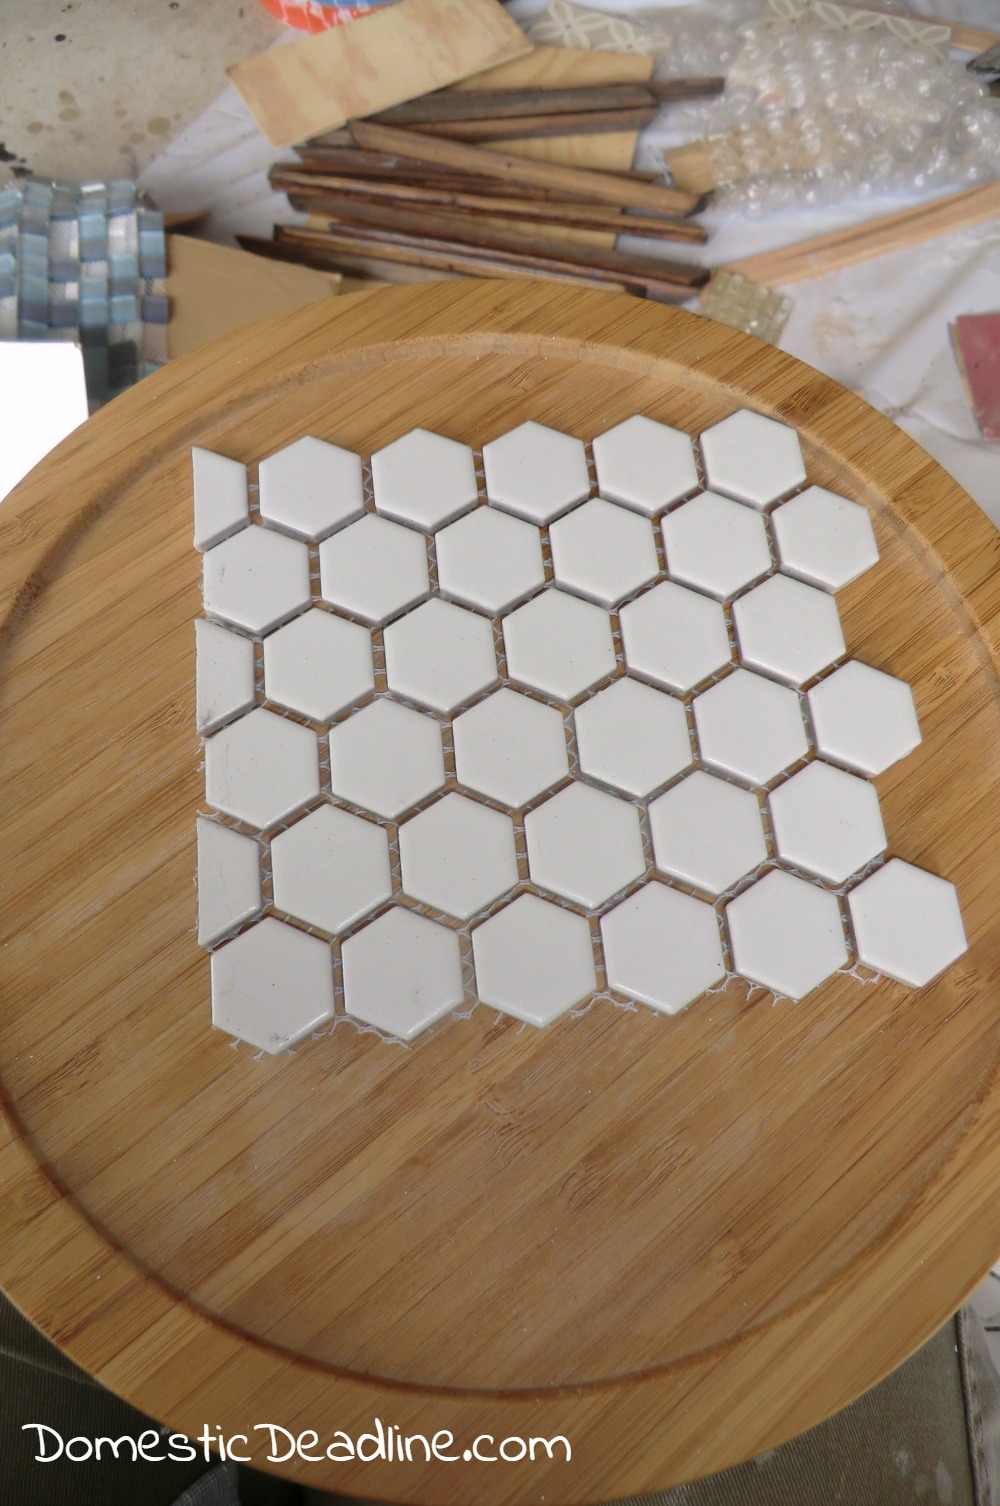 DIY Tile Trays and Lazy Susan - Domestic Deadline